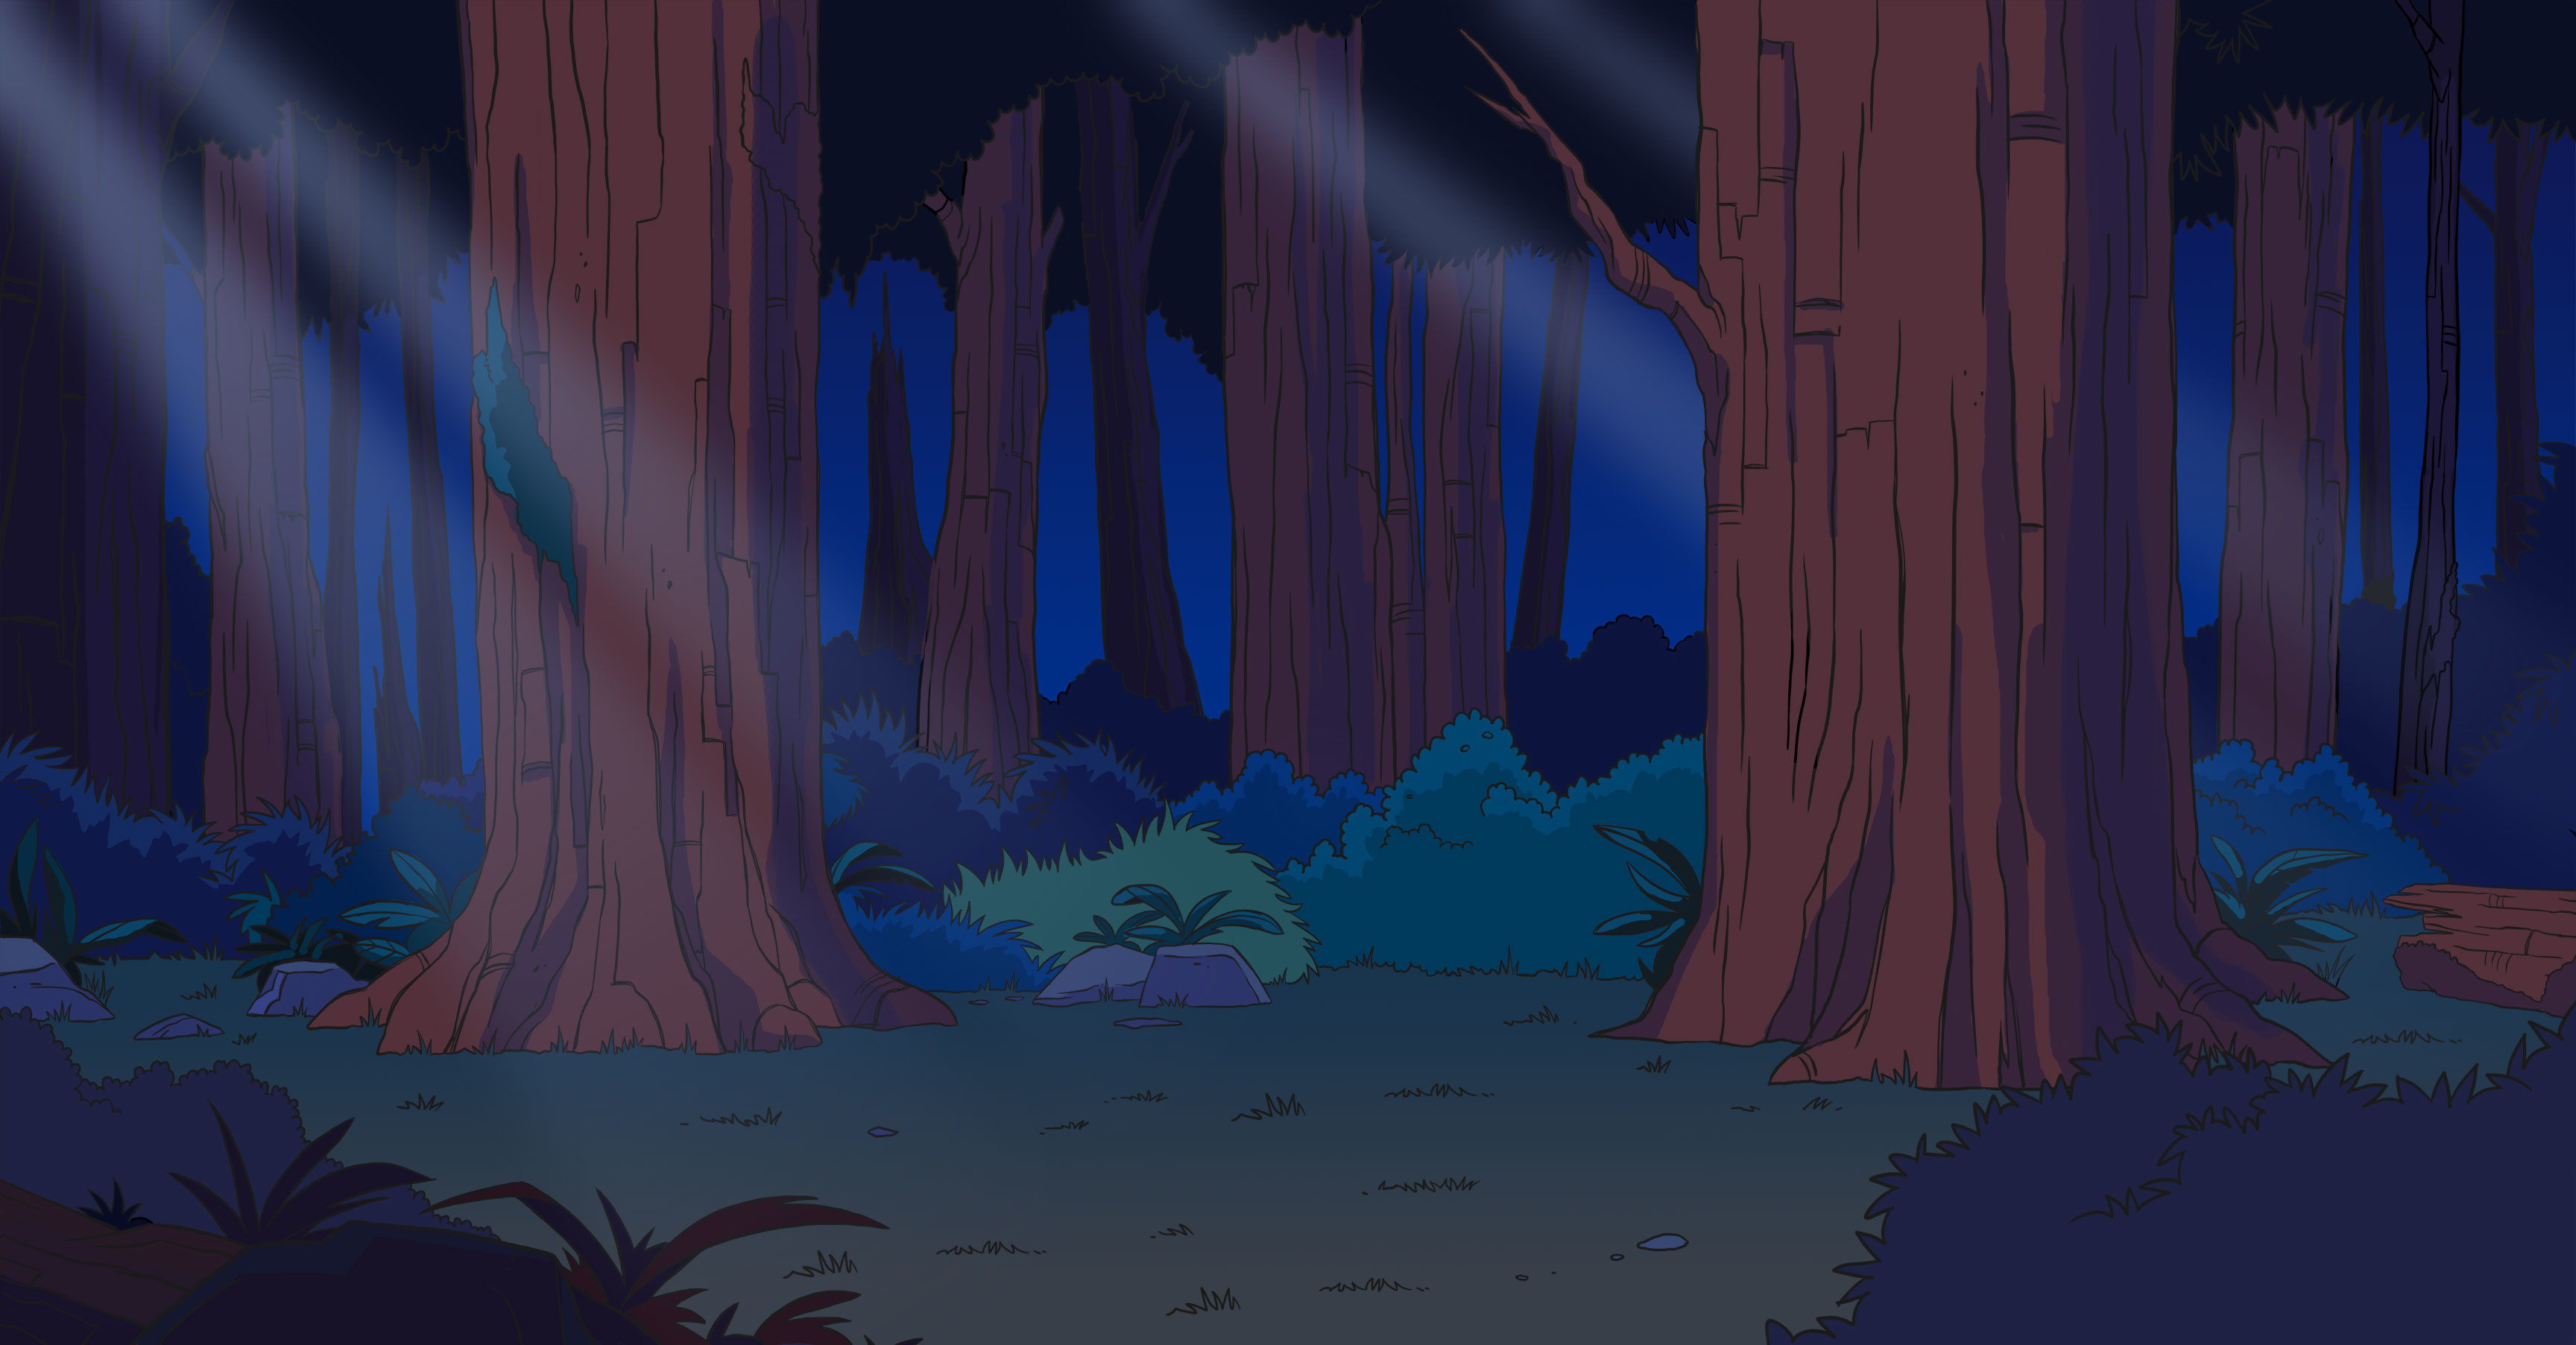 3456x1805 Looney tunes forest background - photo#4